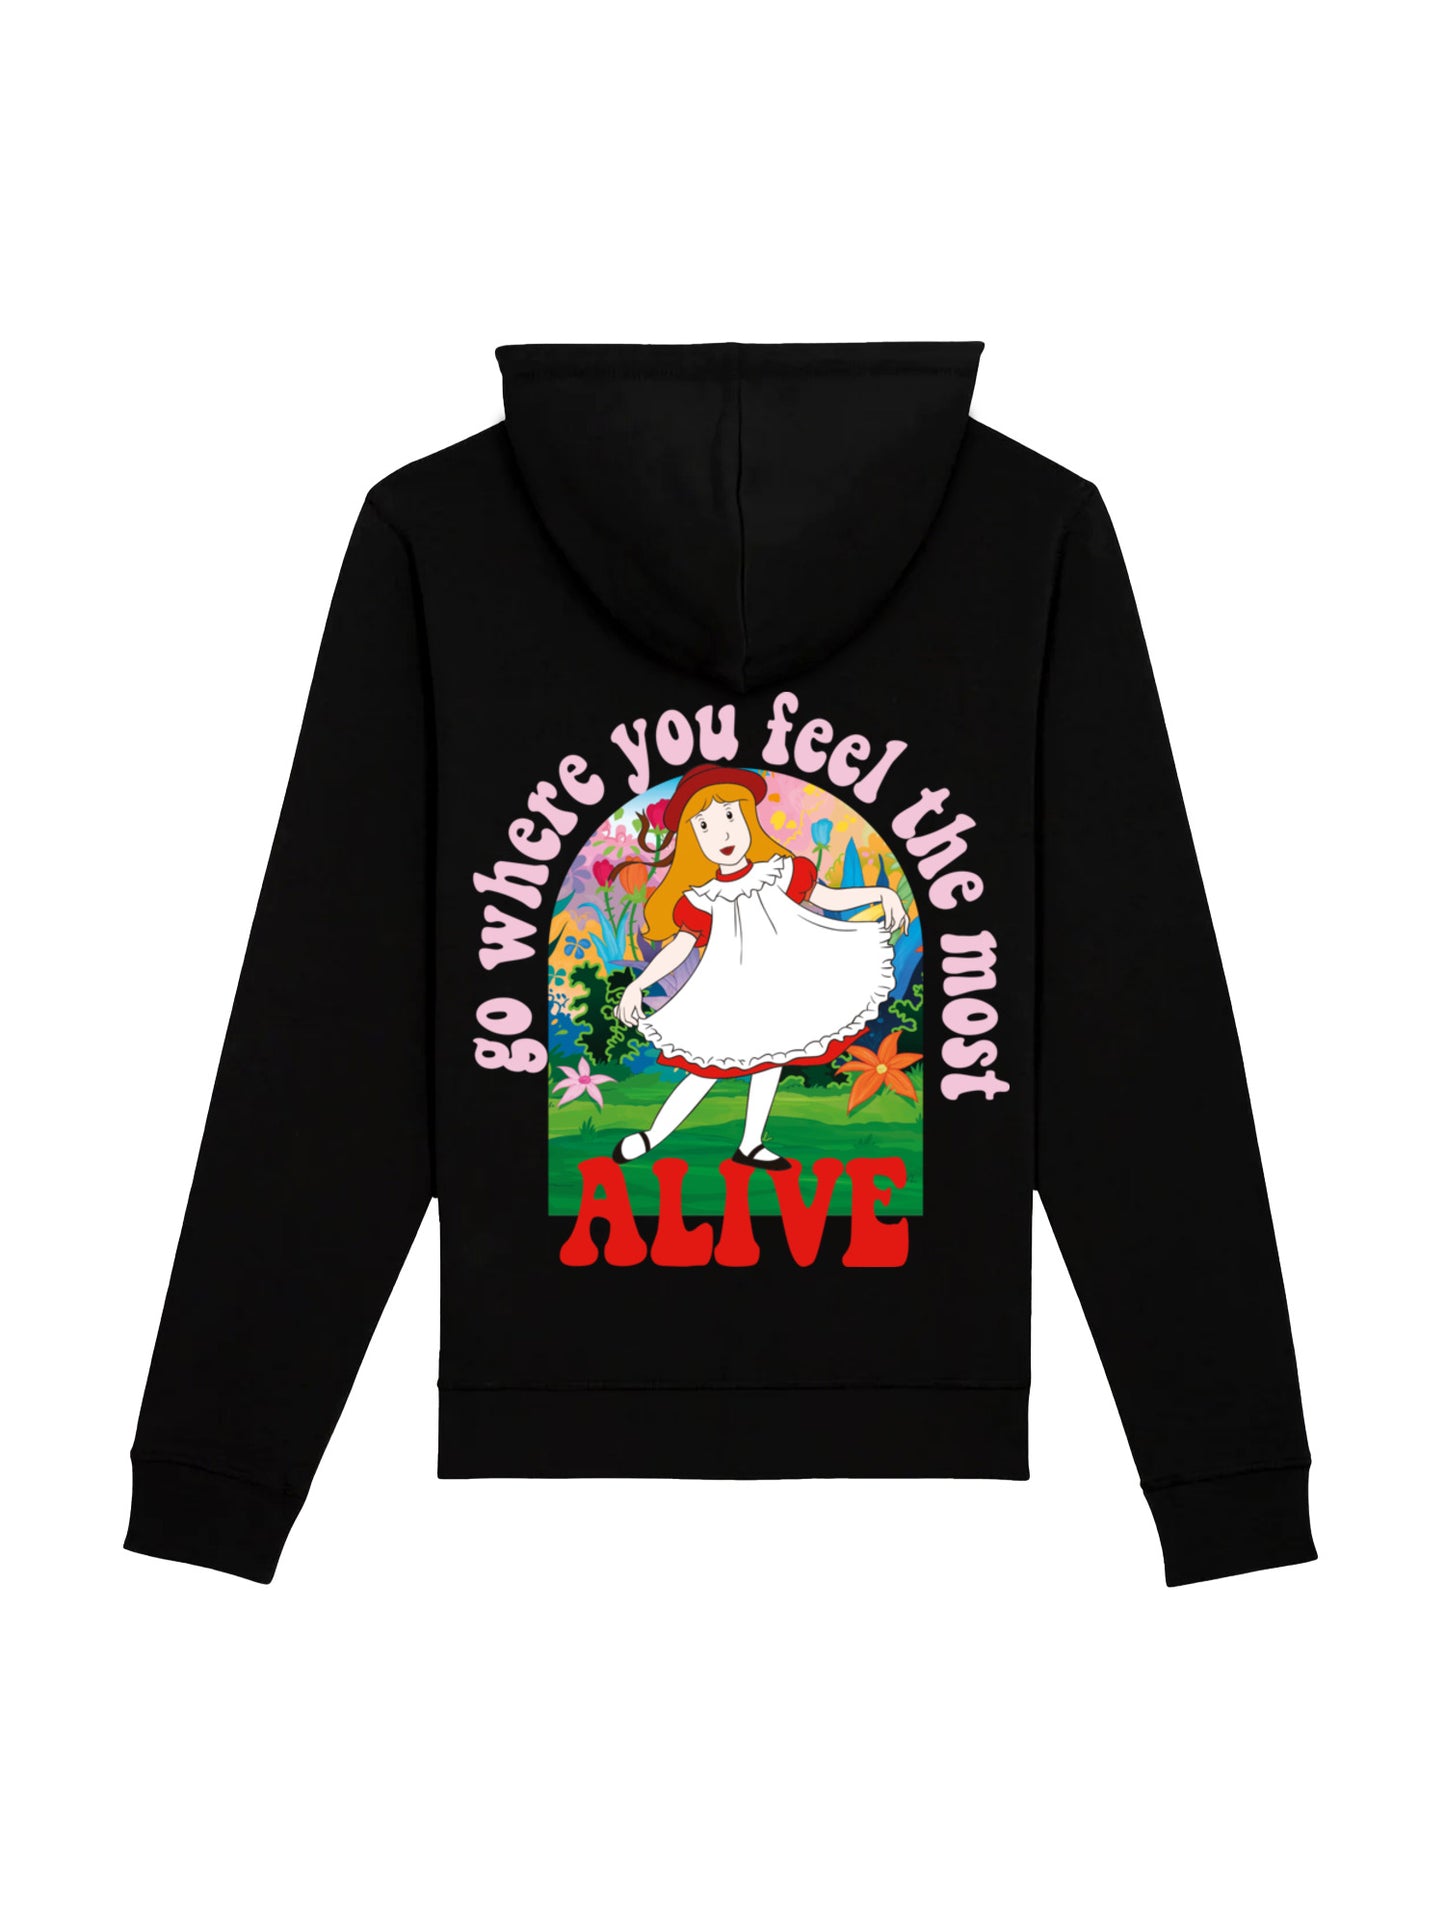 Alice Hut LOGO and Alice In Wonderland Alive and Heroes of Childhood with Women hoodie Stanley&Stella Drummer